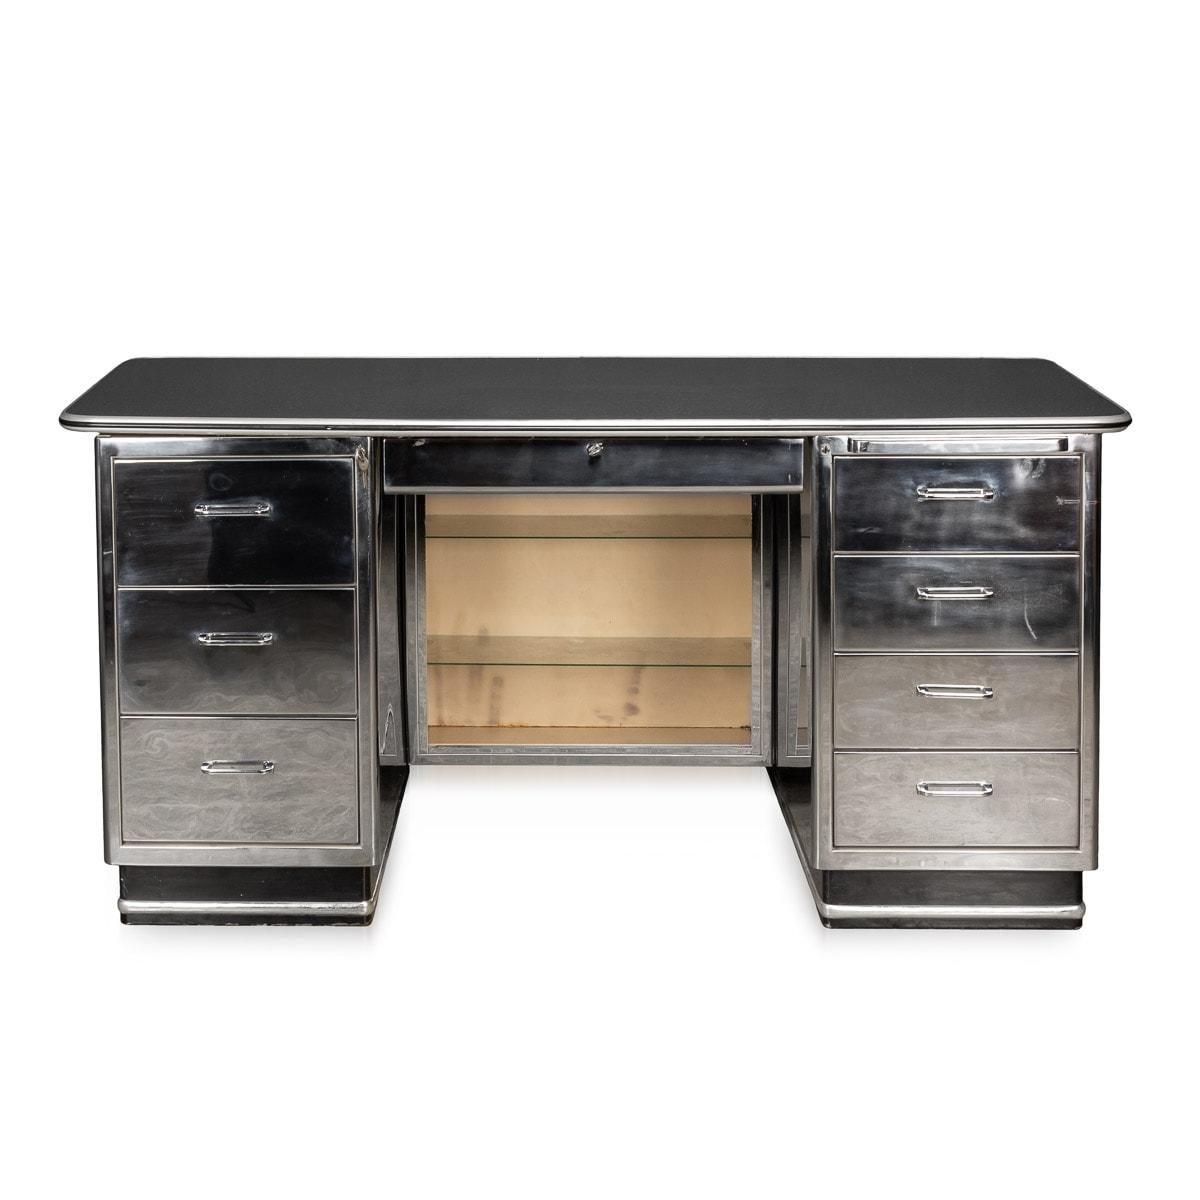 Unusual mid-20th Century polished metal doctors desk with eight lockable drawers of various sizes and a retractable instrument tray. The desk top with the original black formica edged with polished metal. Made and designed by Baisch, a German